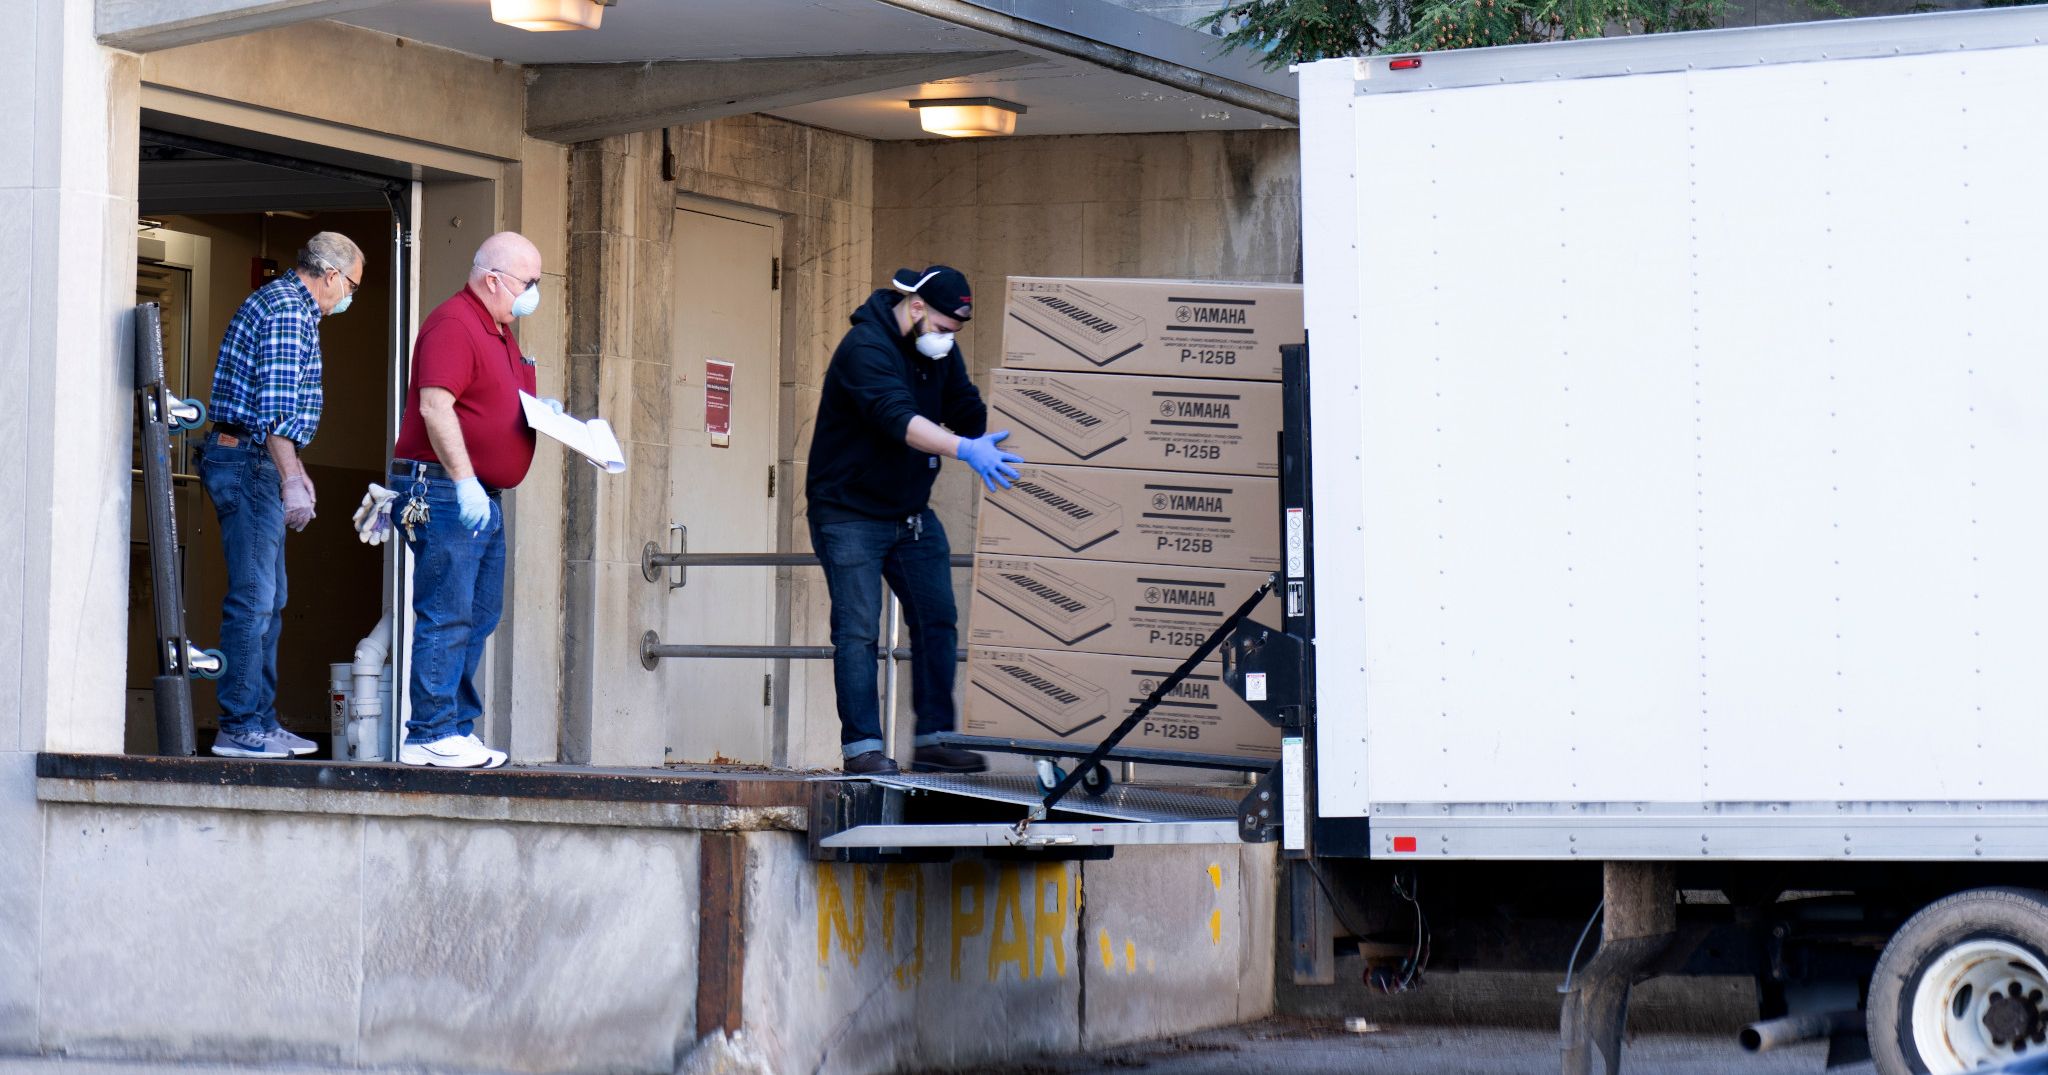 Gloved and masked workers move boxed Yamaha digital pianos from a truck to a loading dock.